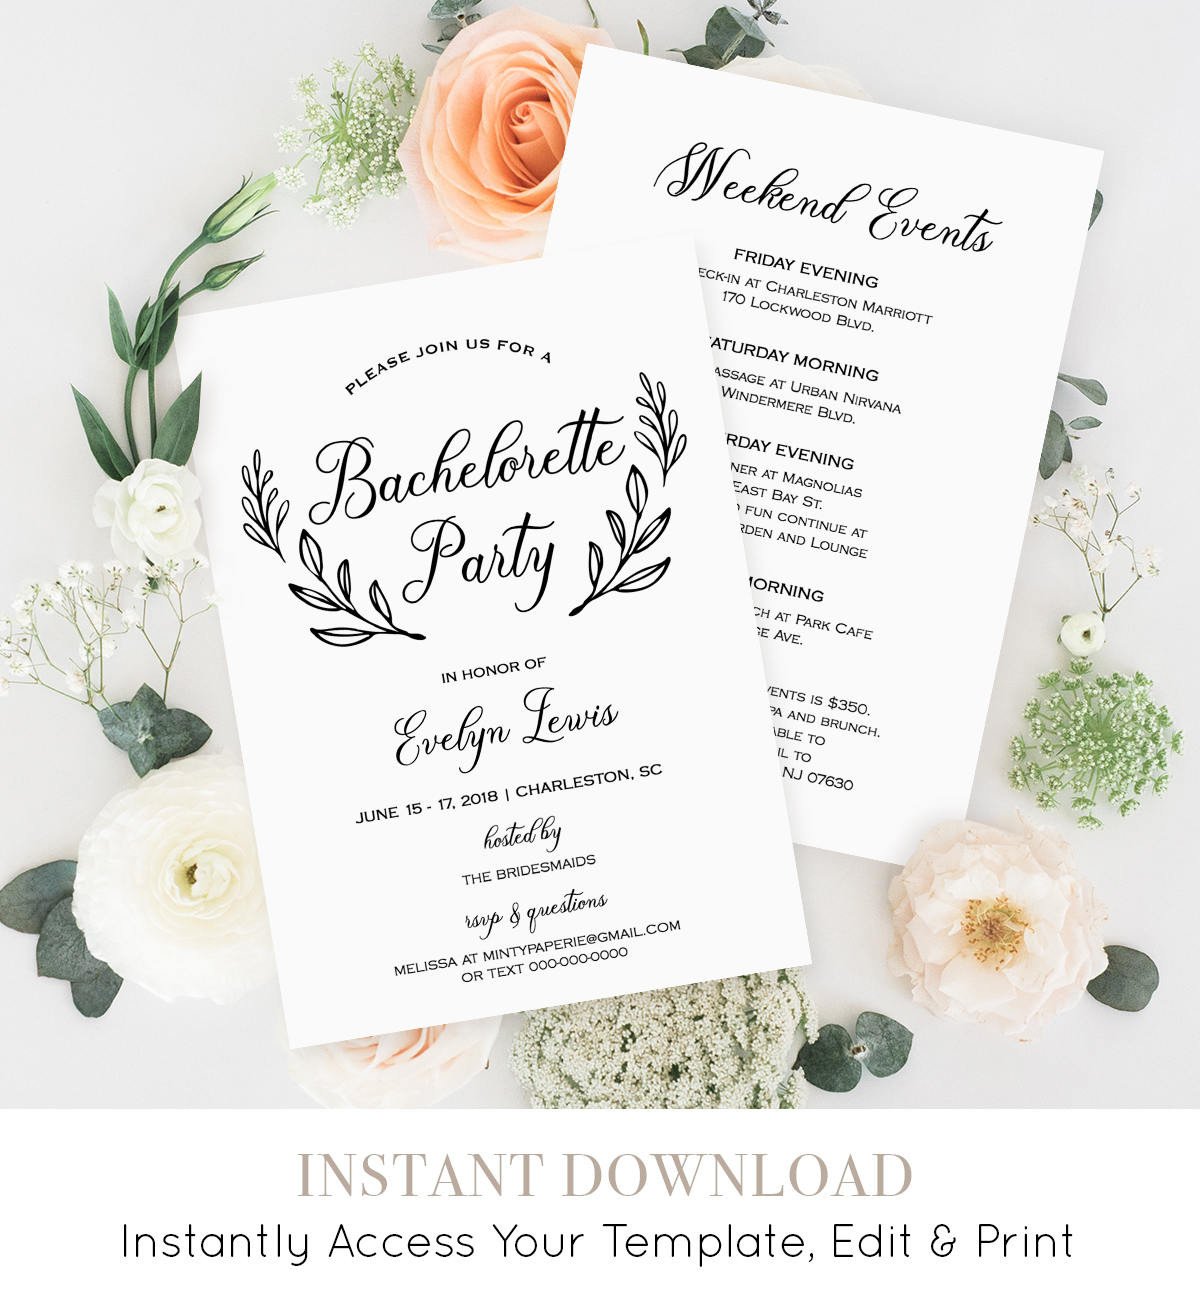 Bachelorette Party Itinerary Template Bachelorette Party Invitation Template Printable